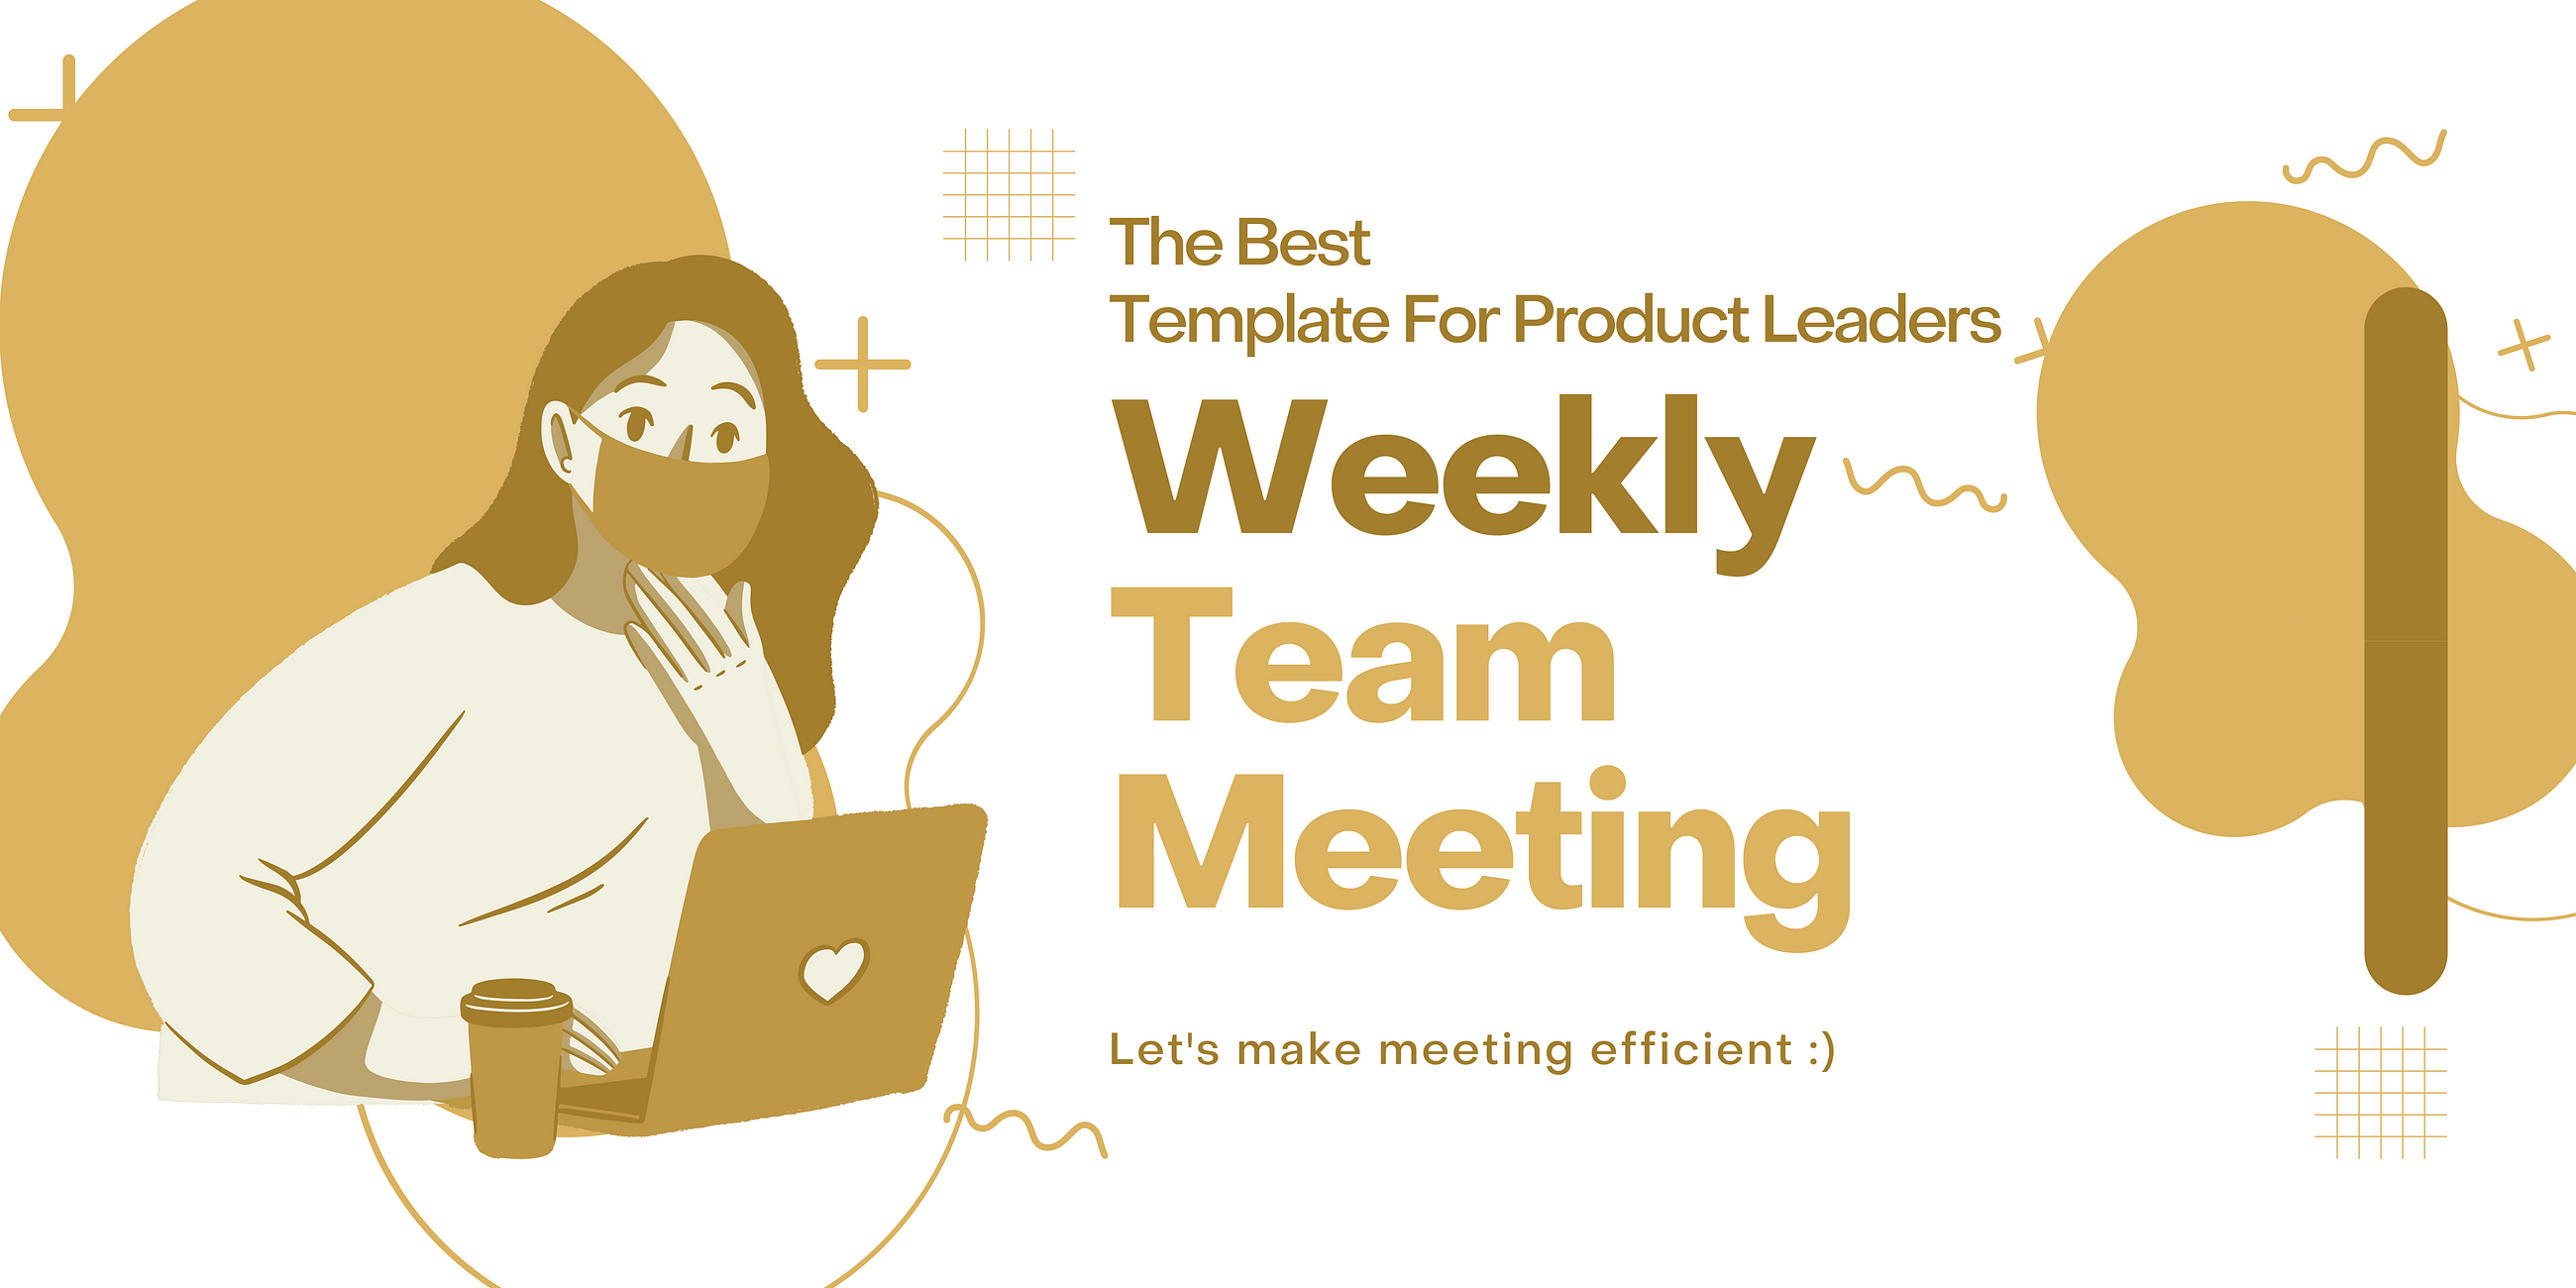 How should Product leaders leverage weekly team meetings? Here is the template!